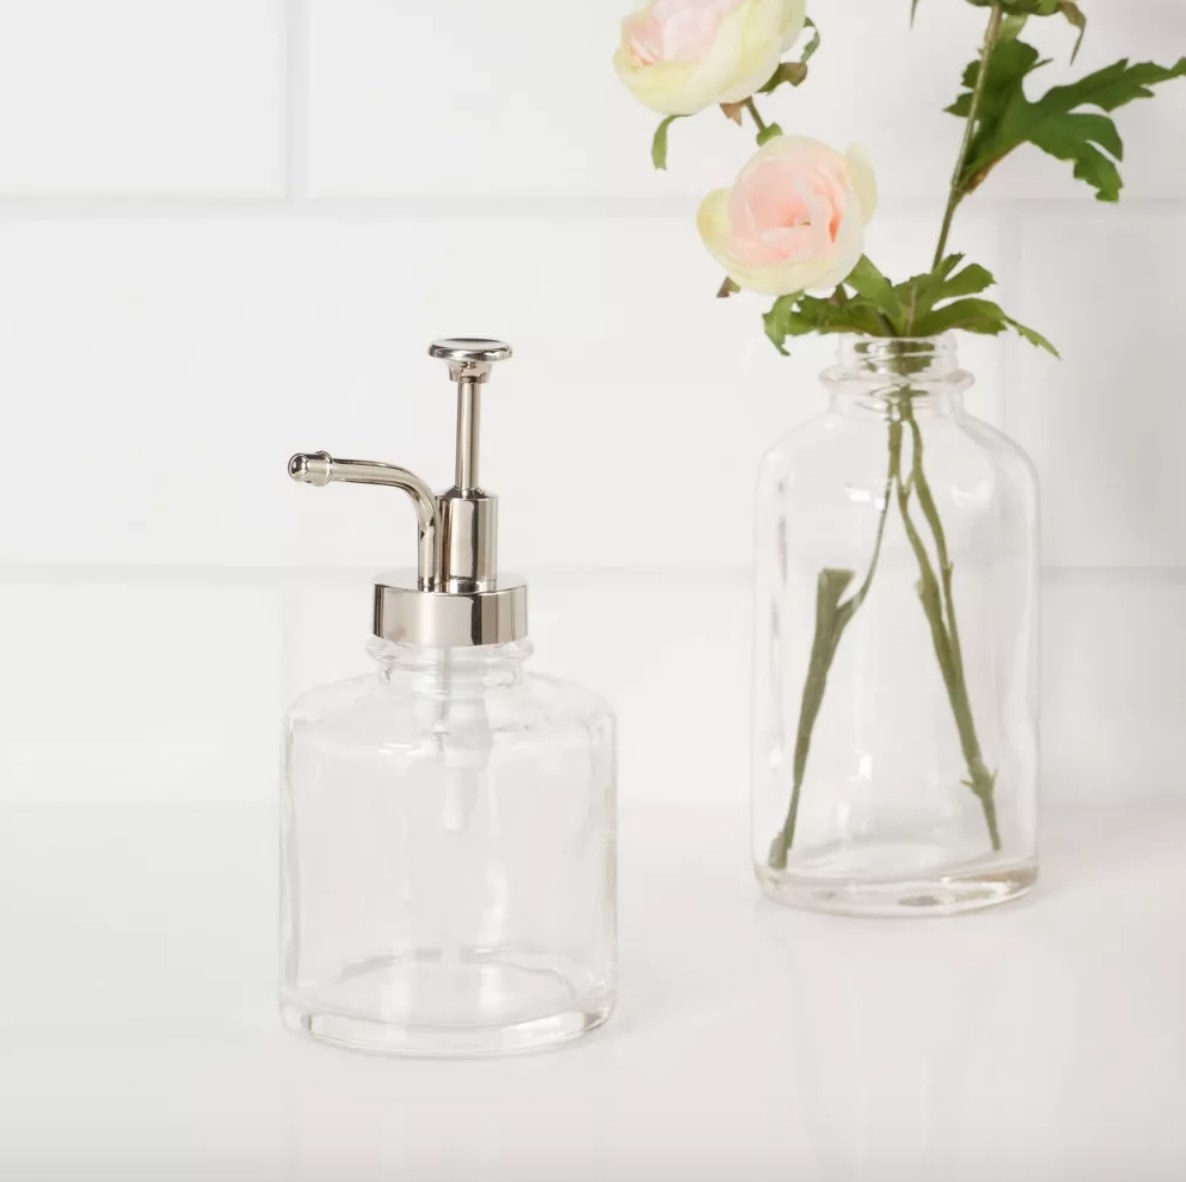 Empty glass soap pump on counter next to clear vase of flowers